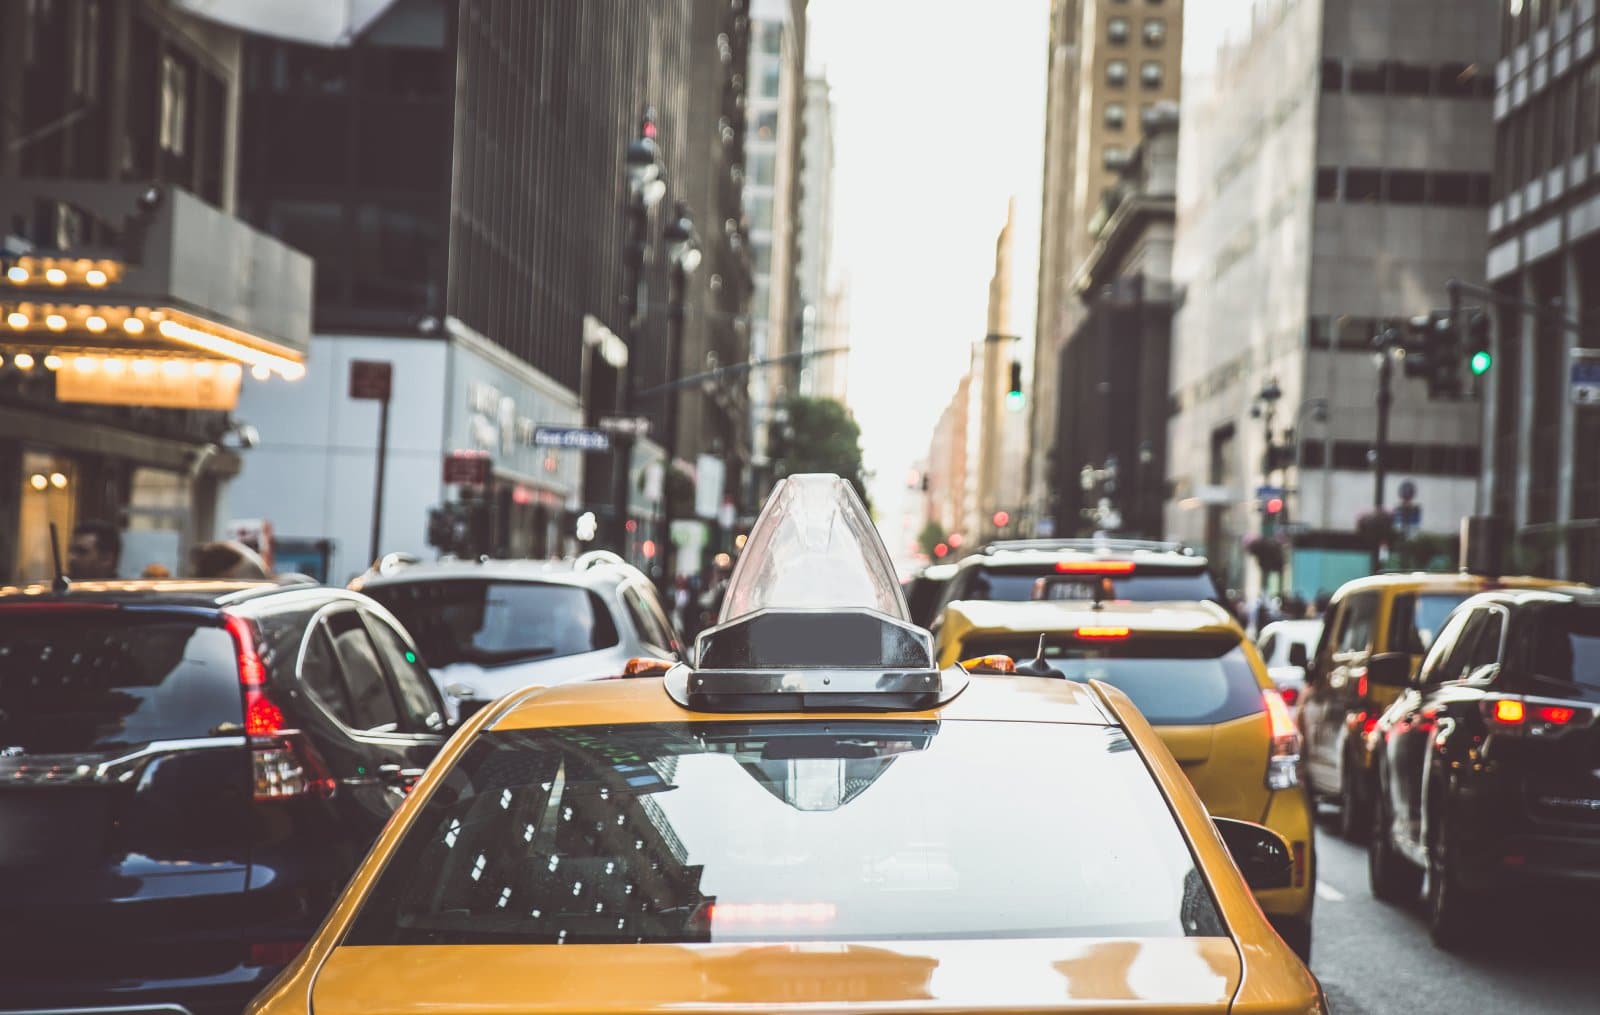 <p class="wp-caption-text">Image Credit: Shutterstock / oneinchpunch</p>  <p>This term is used somewhat pejoratively to describe people who commute to Manhattan from surrounding areas, not using the subway.</p>